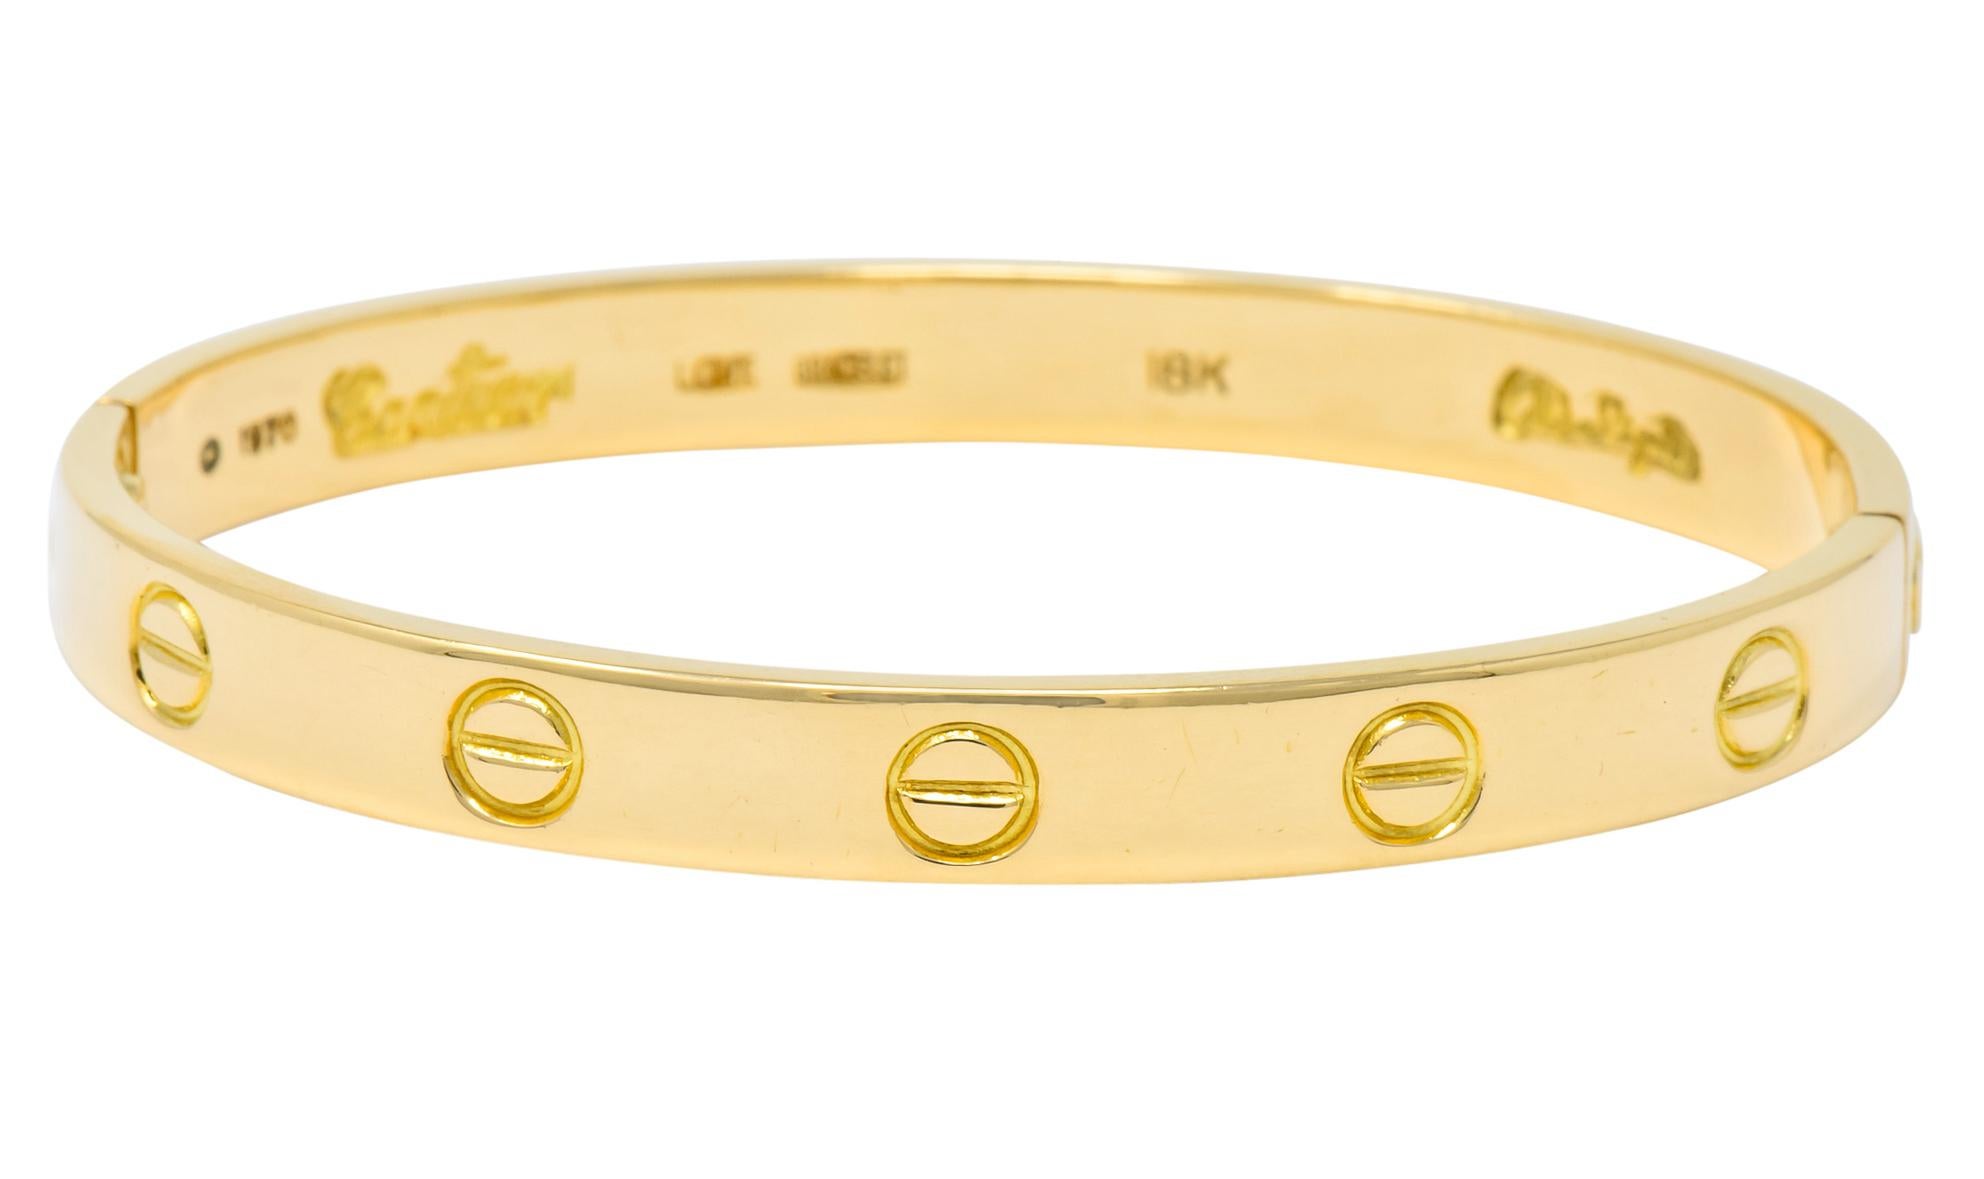 Featuring a high polished bangle bracelet of 18 karat rose gold

Accented with love symbol

Secured with screw closure on both ends

Fully signed 1970 Cartier Love Bracelet 18k Aldo Cipullo

Measures 6mm wide with 2.5mm thickness

Inner measurement: